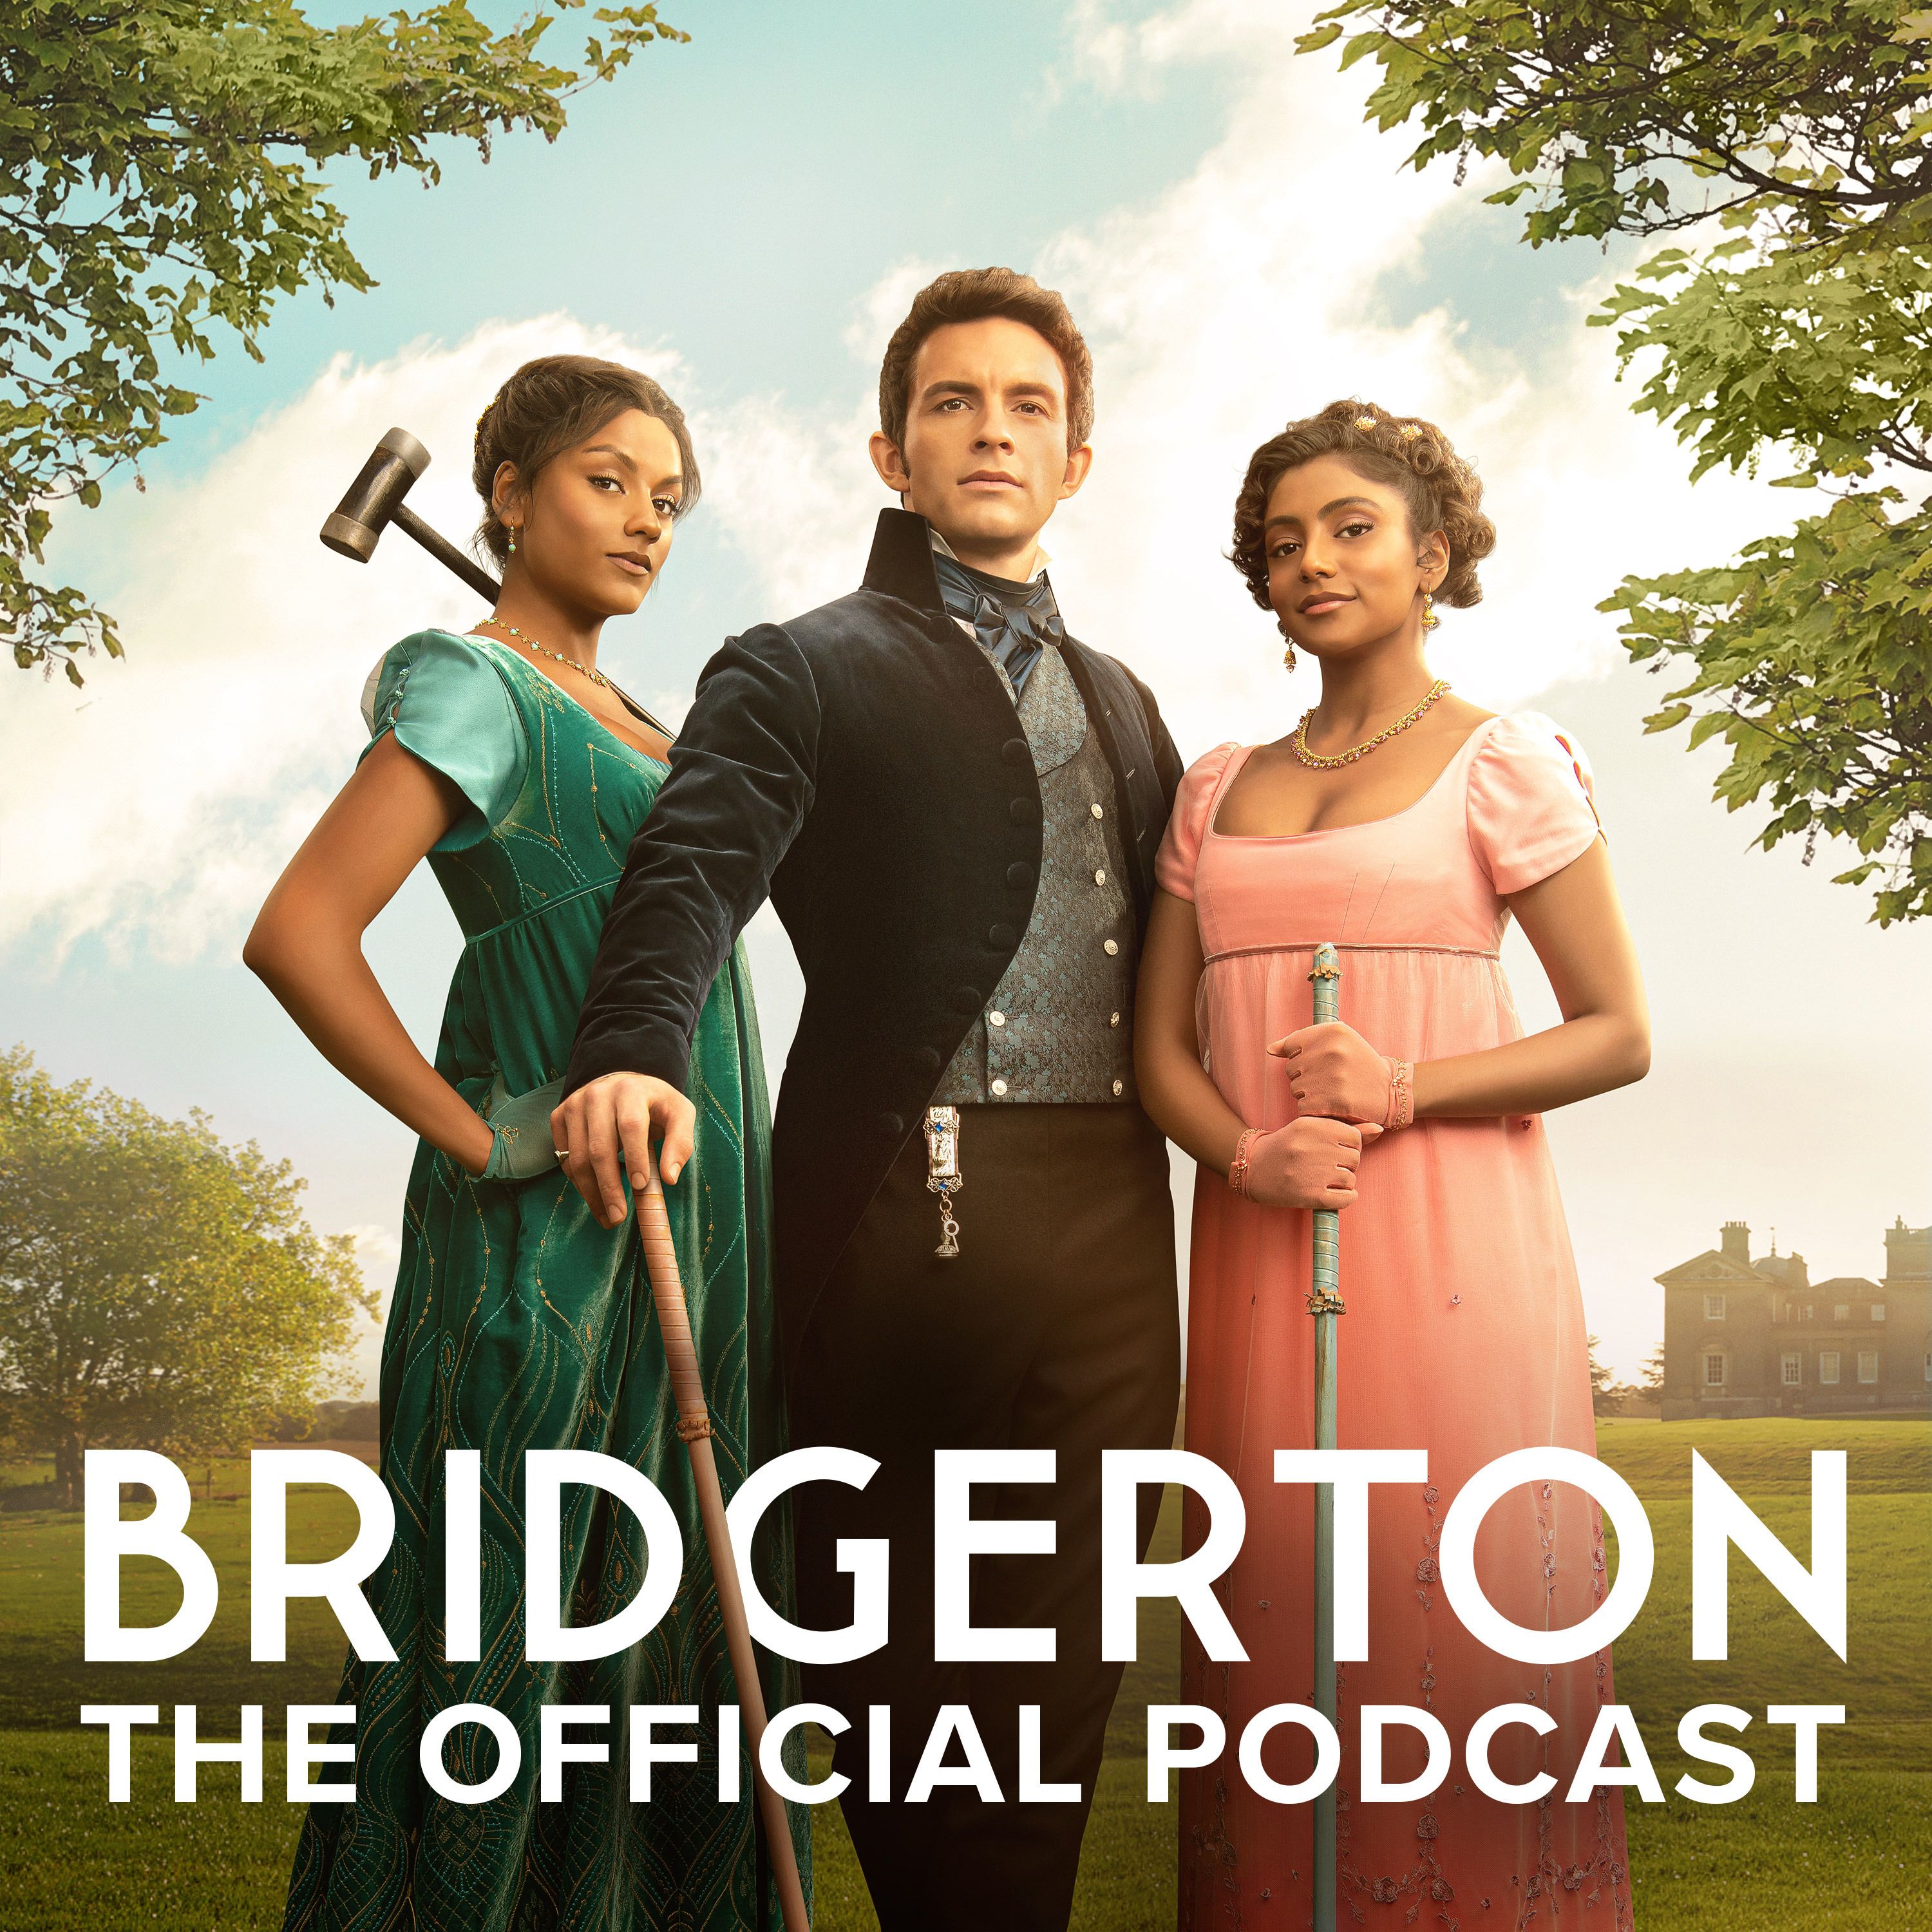 Bridgerton: The Official Podcast' Returns With Season Two!